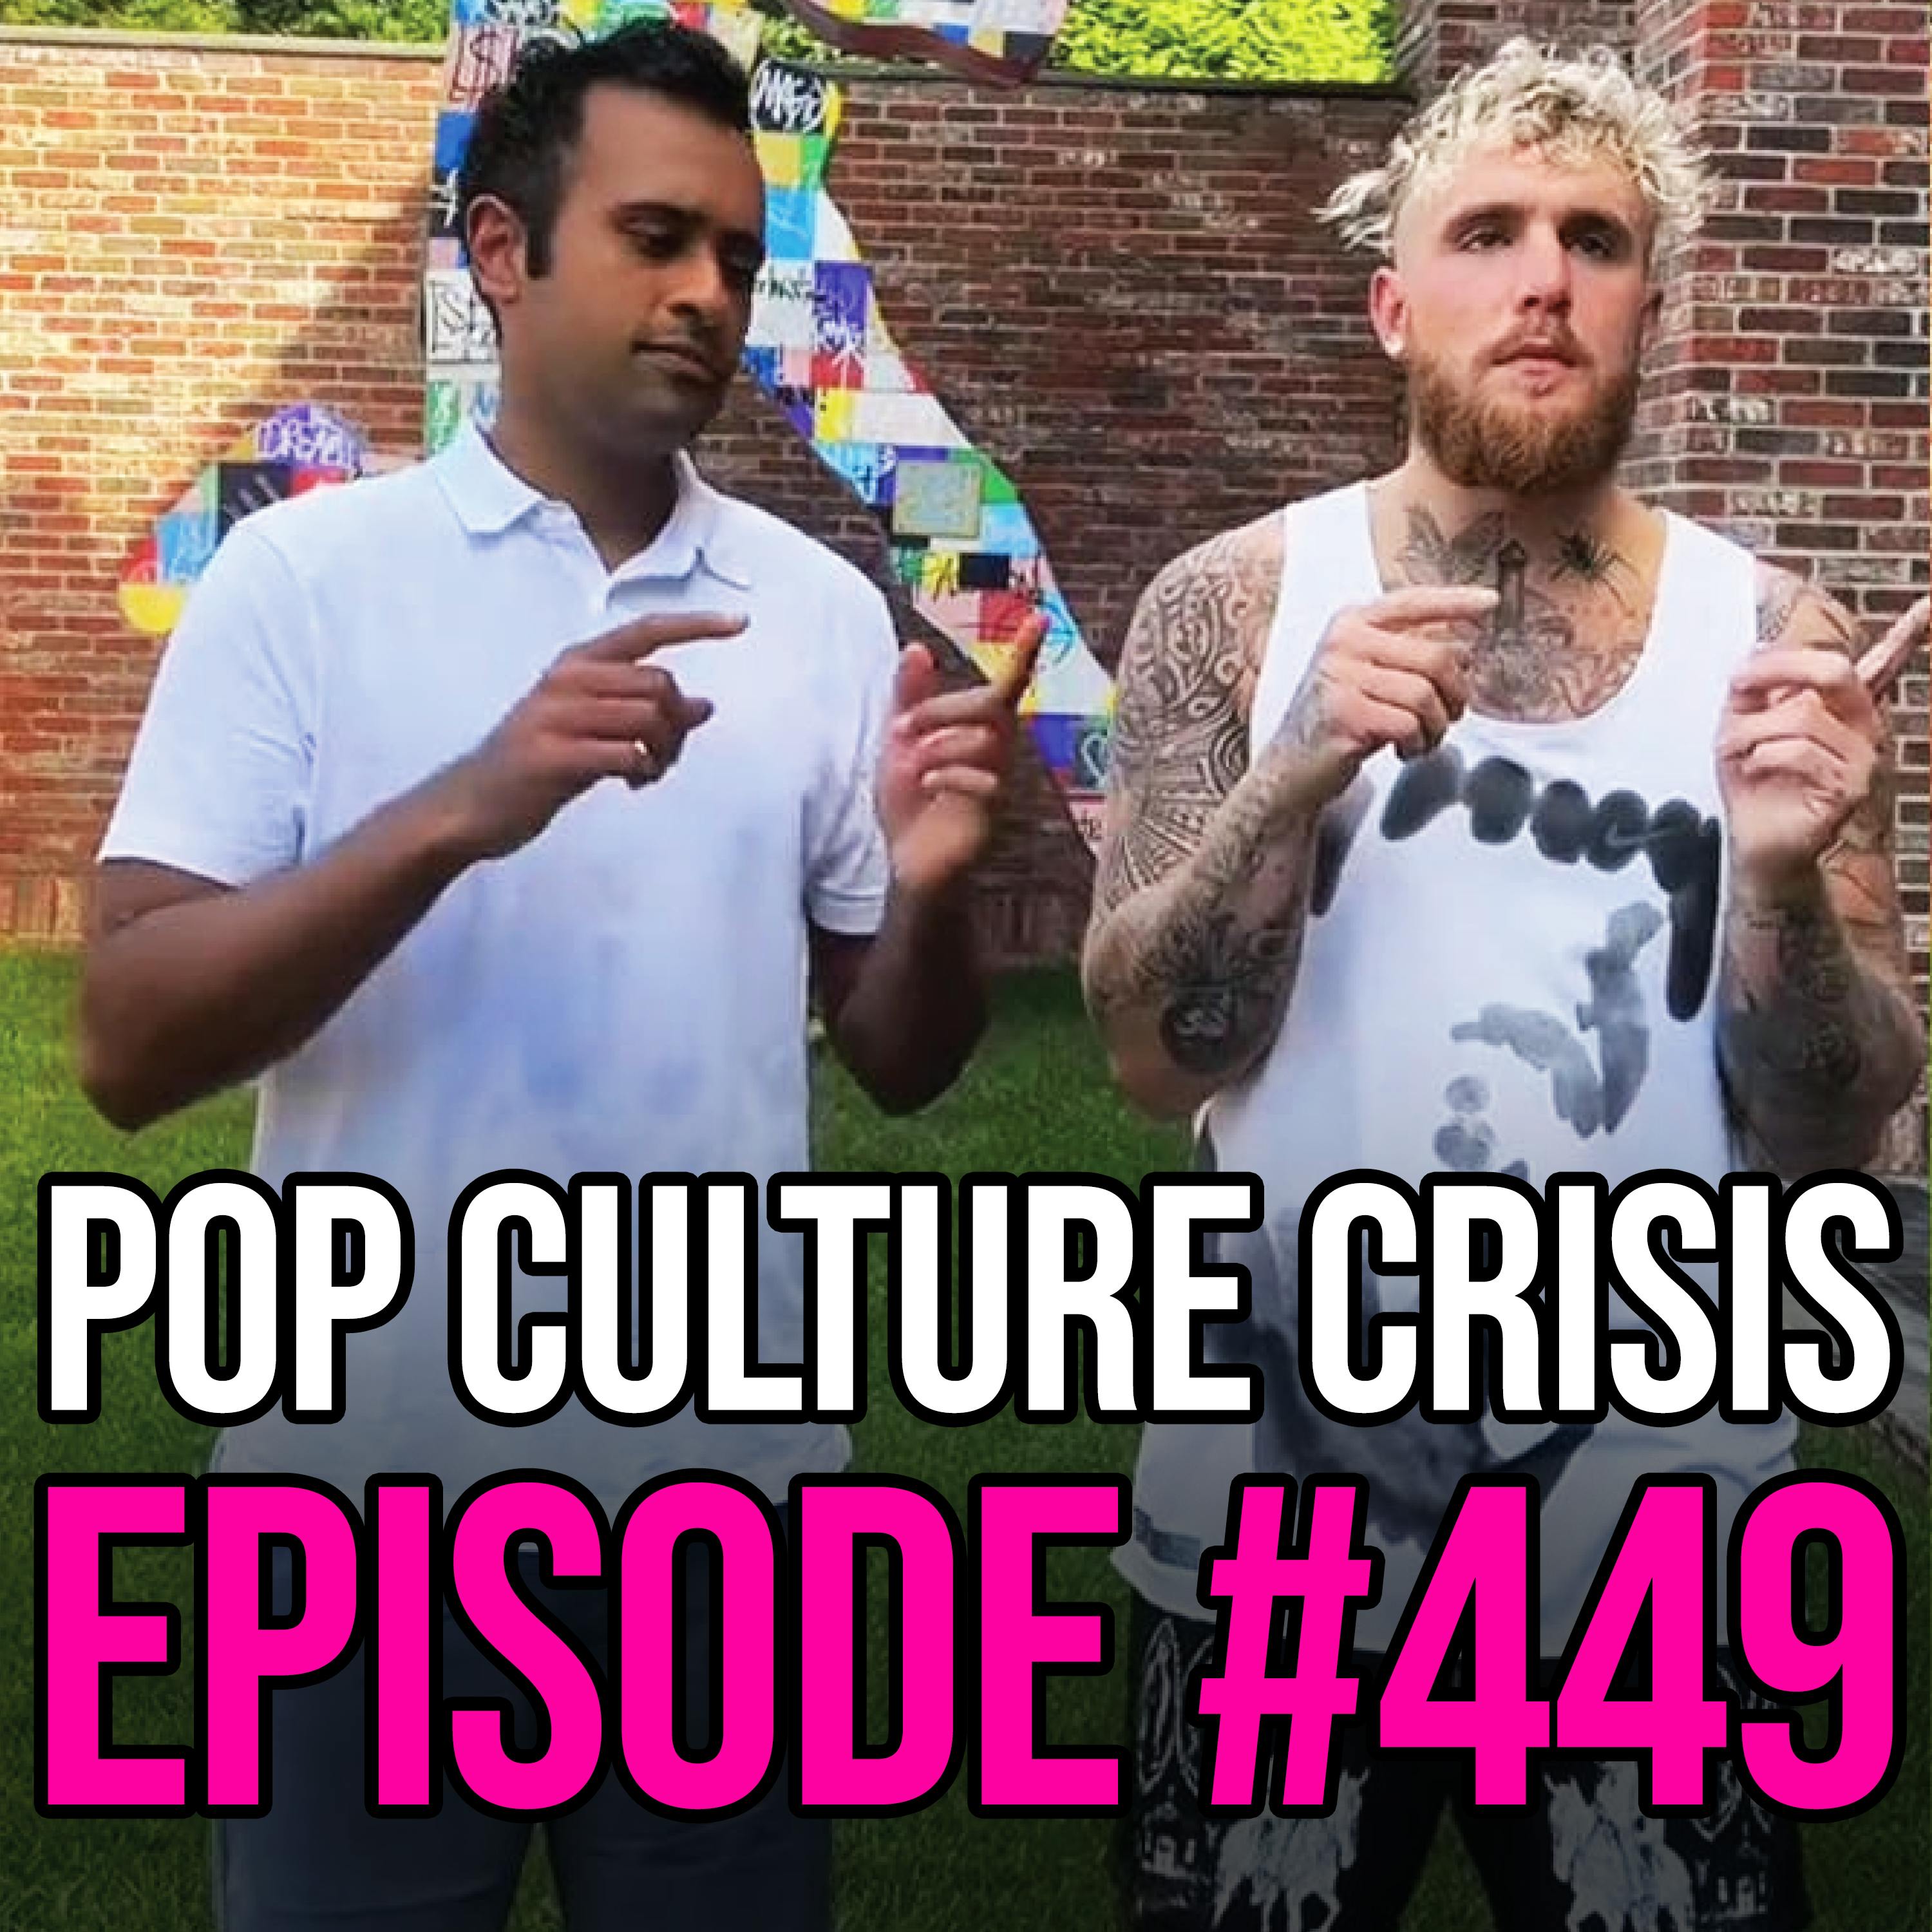 EPISODE 449: Jake Paul Hangs Out With Vivek, Matt Walsh on Dancing With the Stars?!